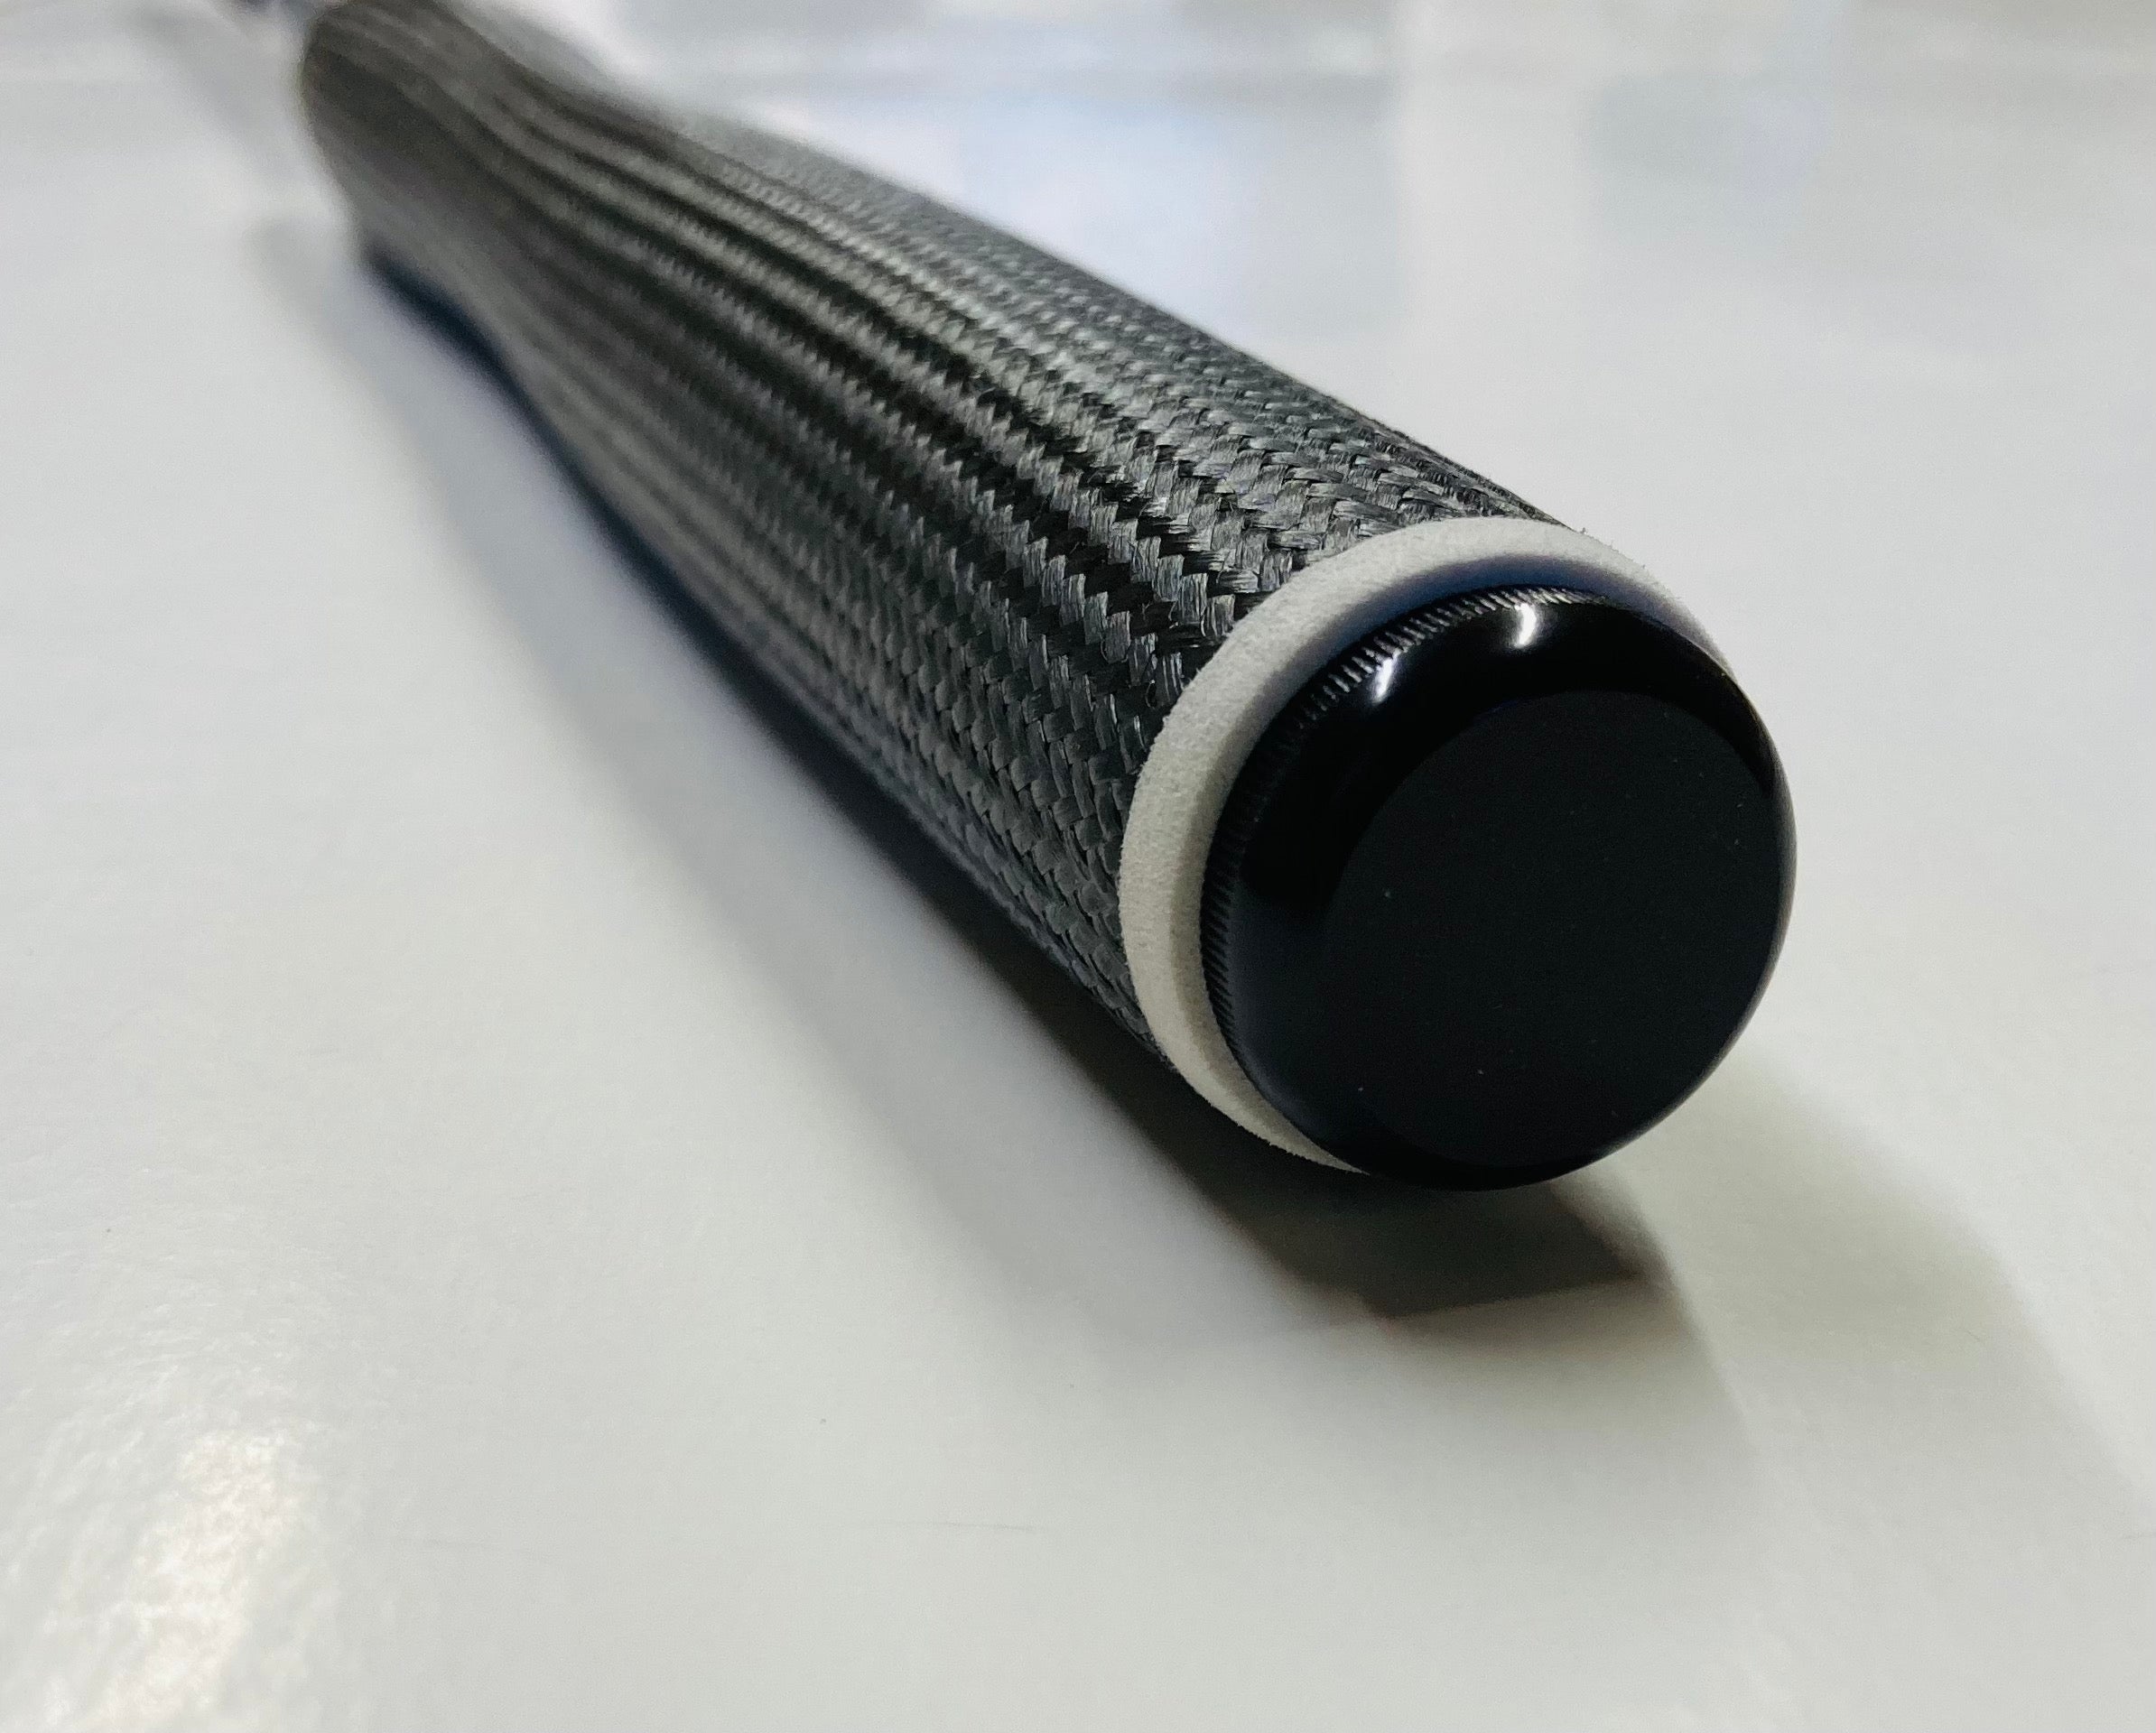 ZX4-PRO 395CM GEN 1.5-- BLACK FRIDAY SALE LIVE NOW-- All remaining rods are $379!!